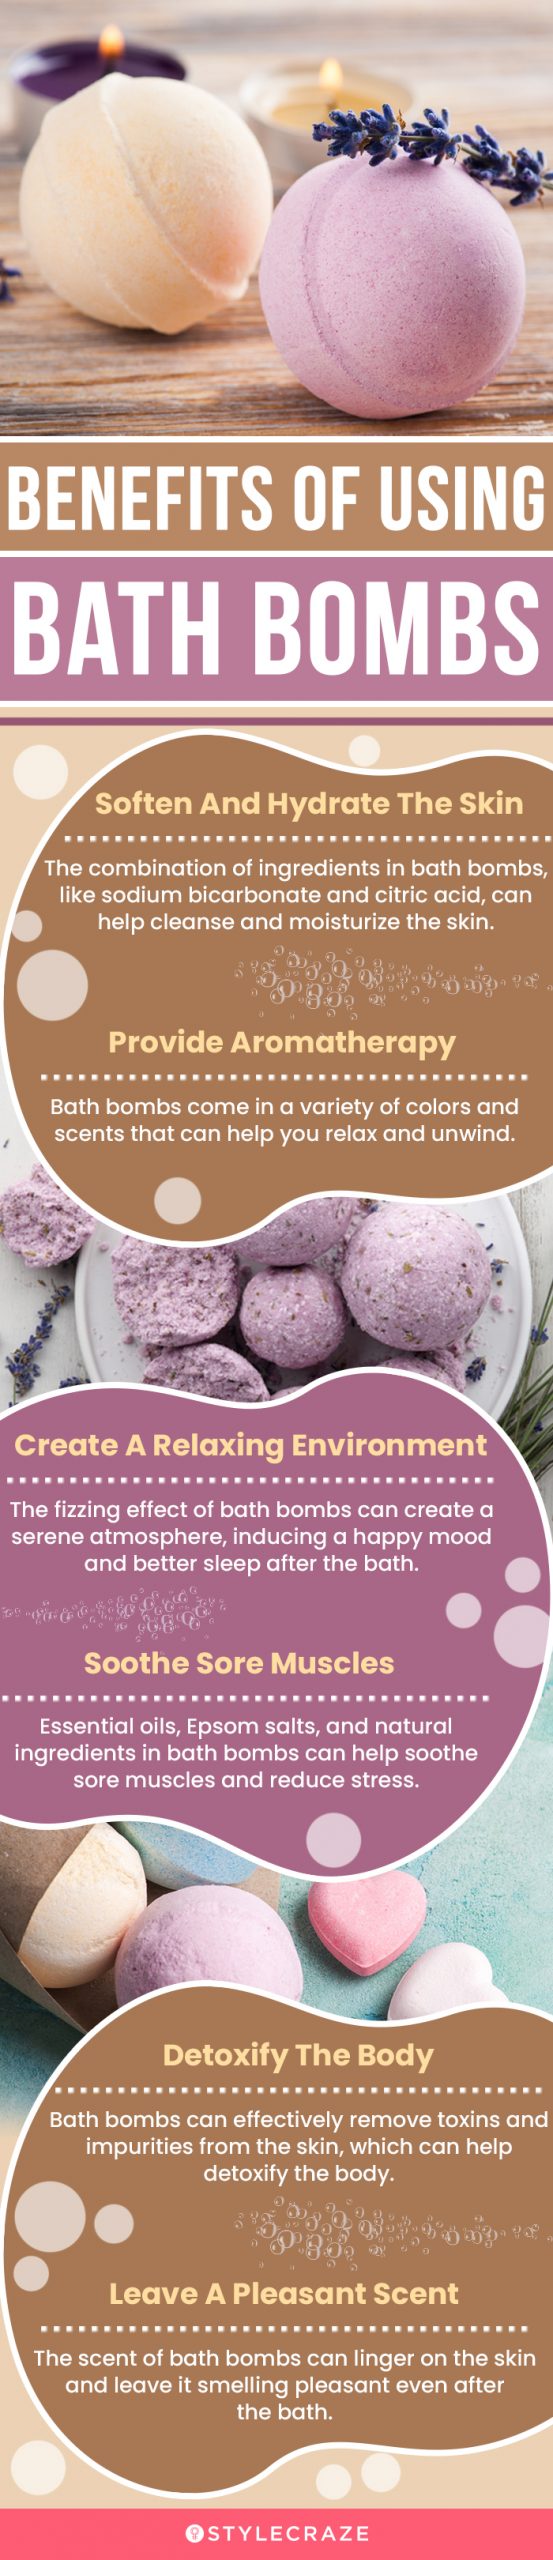 Benefits Of Using Bath Bombs (infographic)